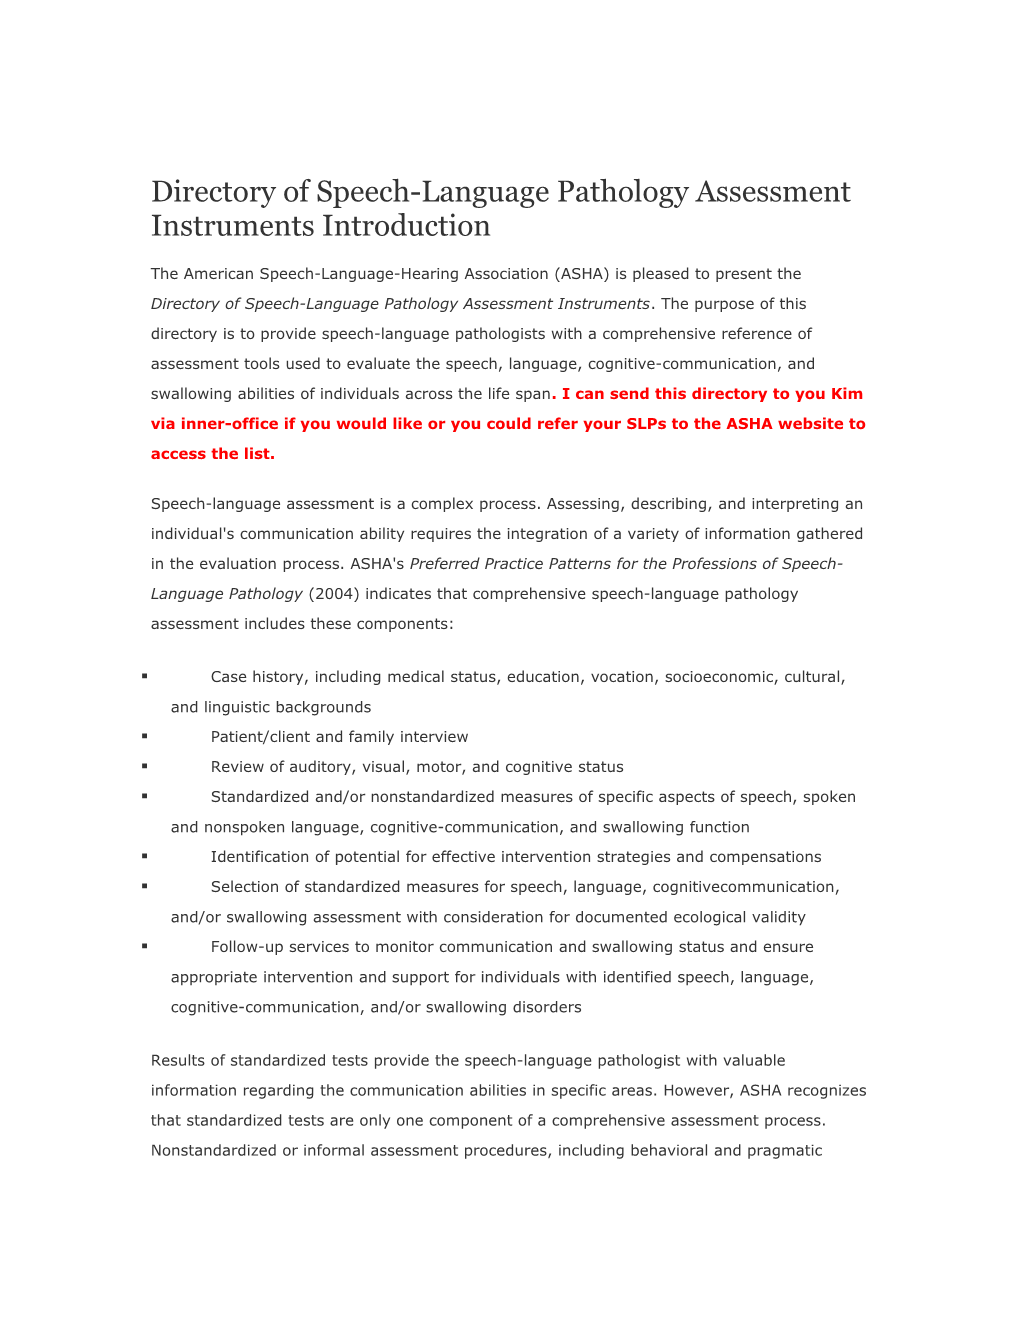 Directory of Speech-Language Pathology Assessment Instruments Introduction